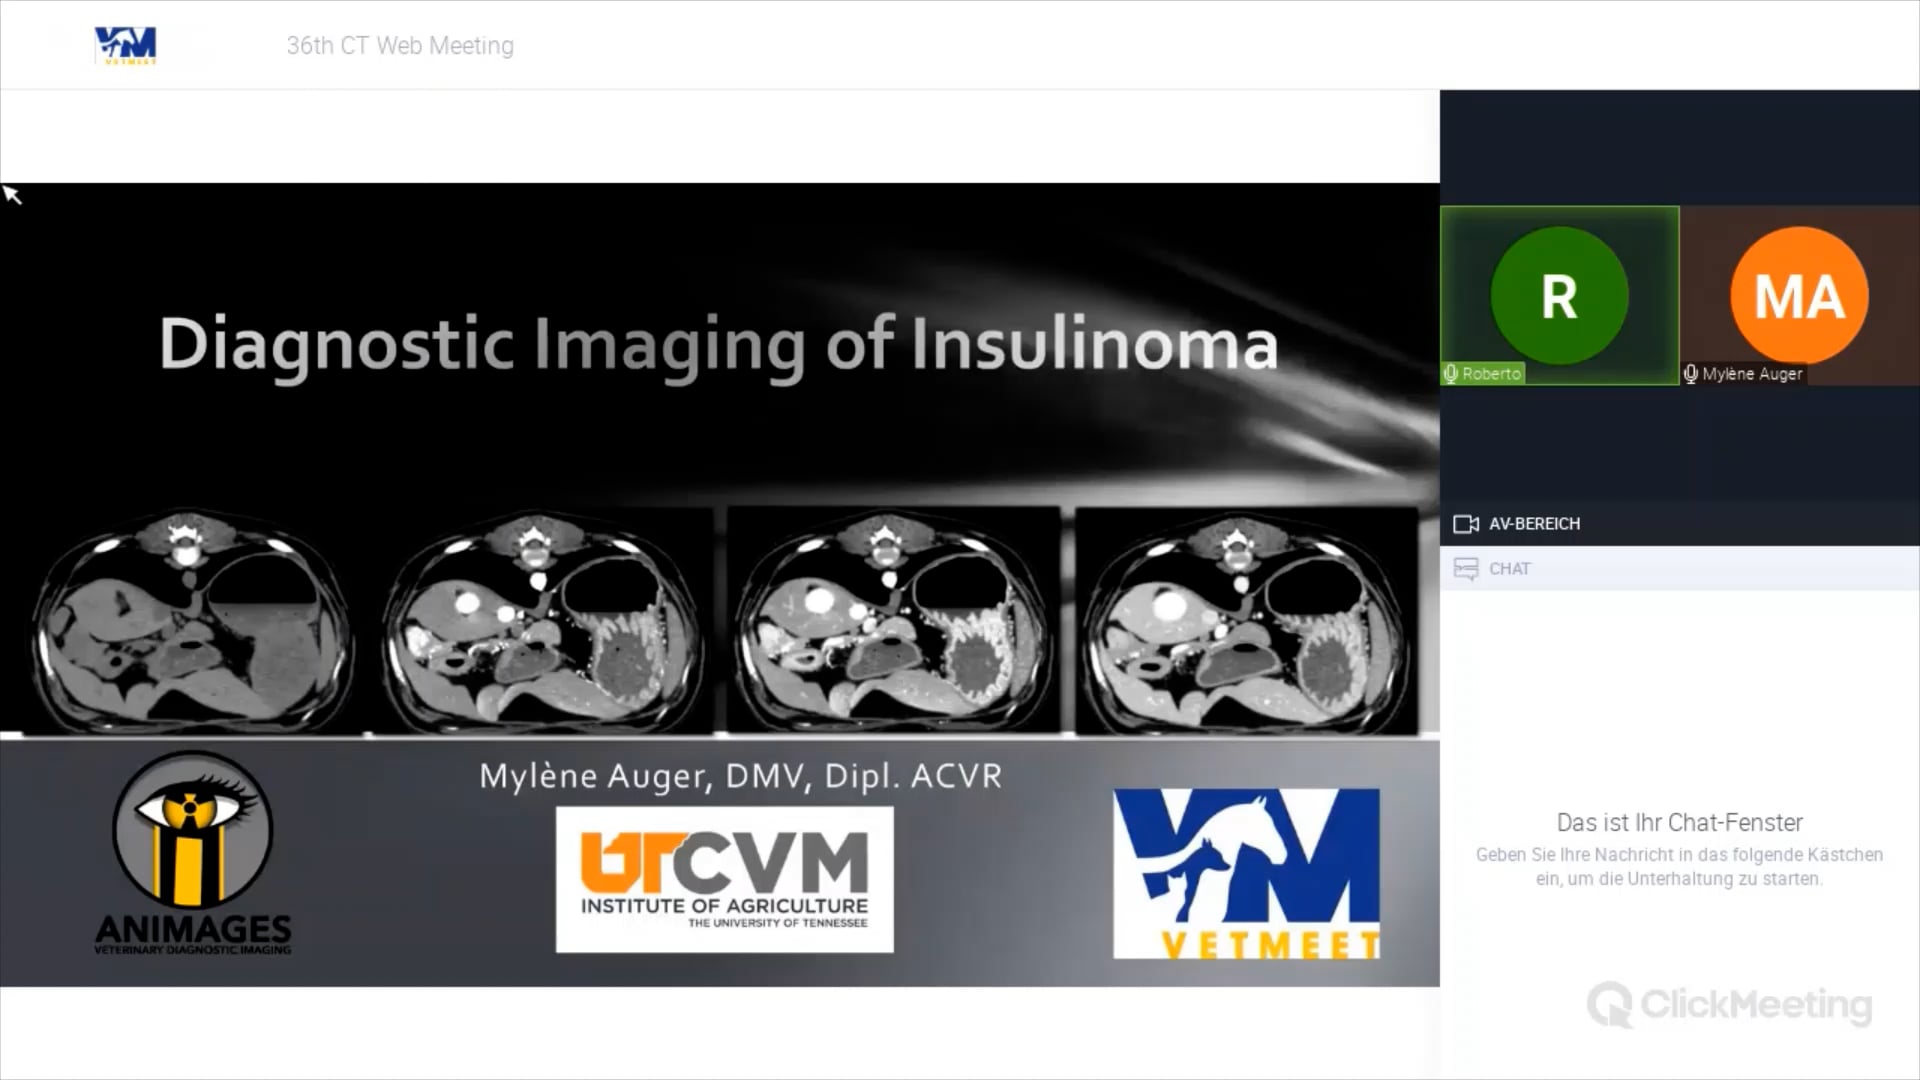 Imaging of insulinoma: protocols, anatomy and clinical applications